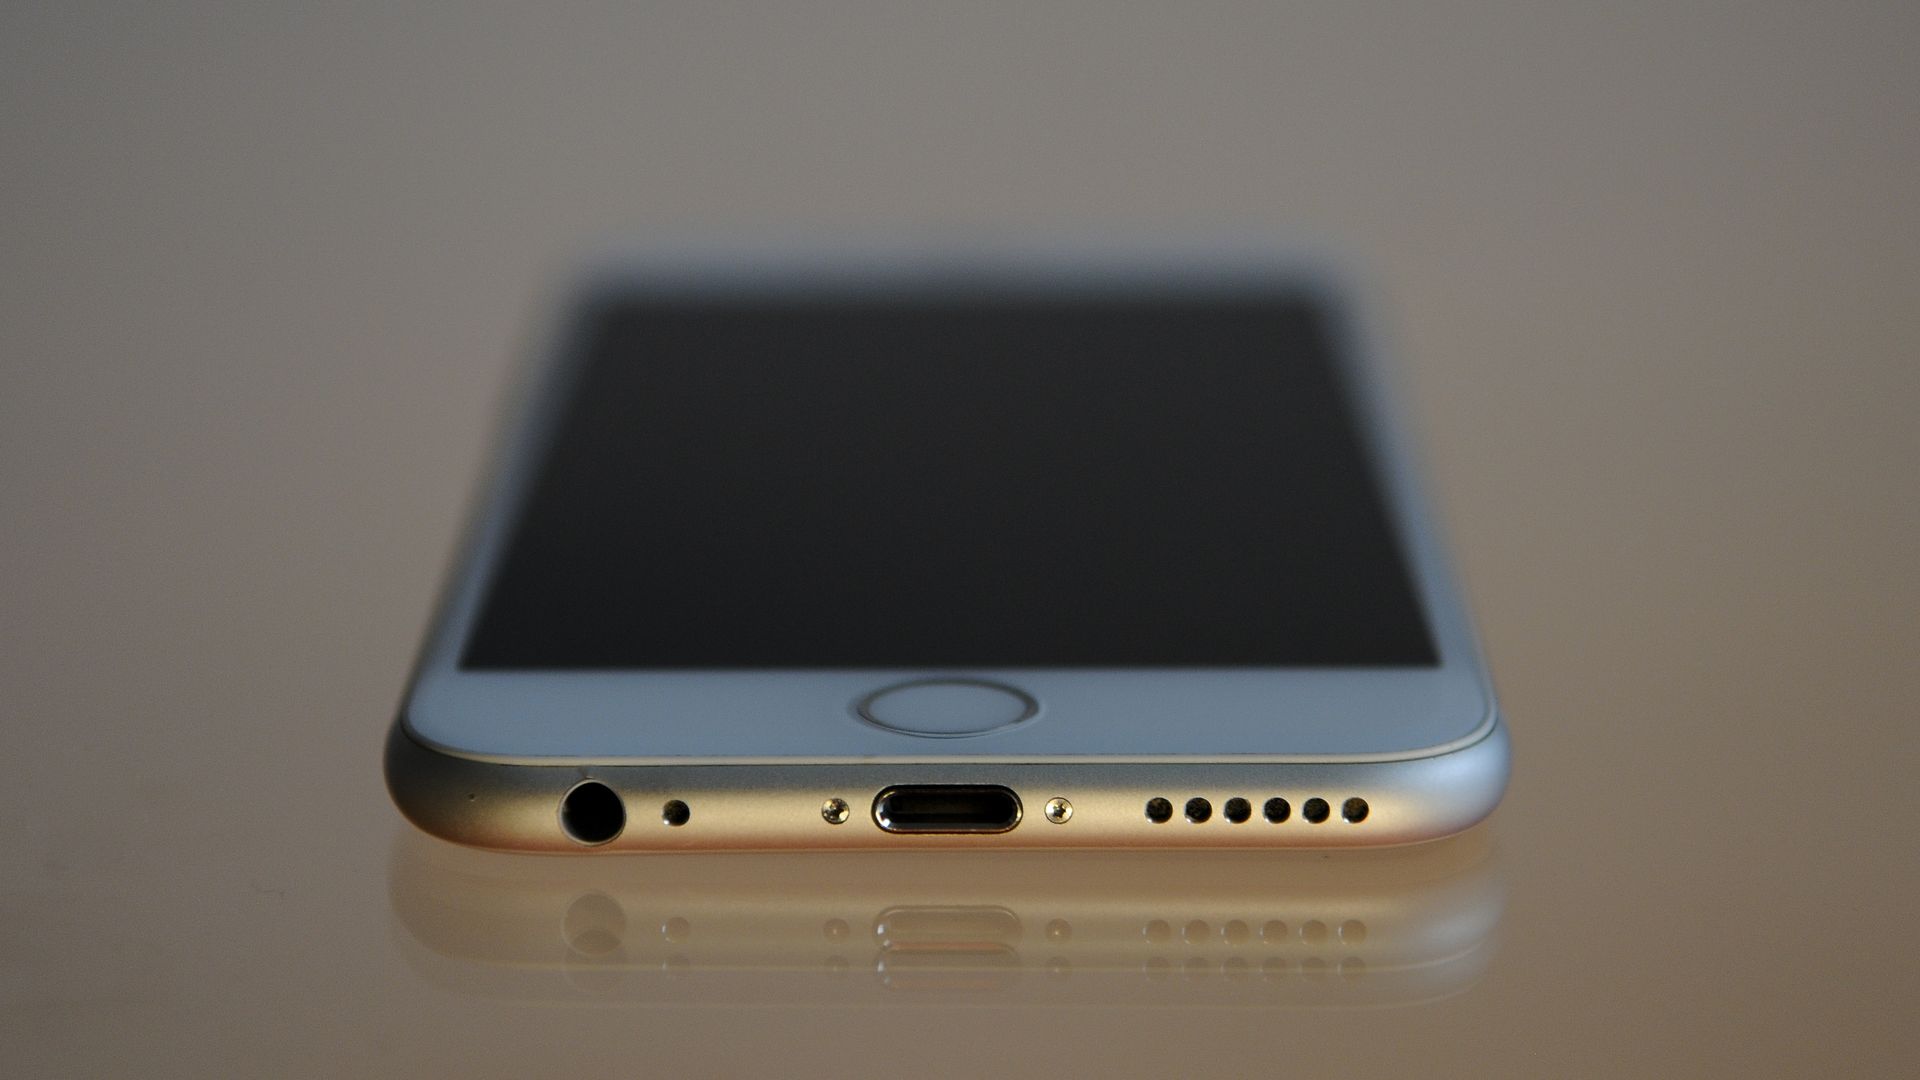 An iPhone 6 viewed with the charging port in foreground